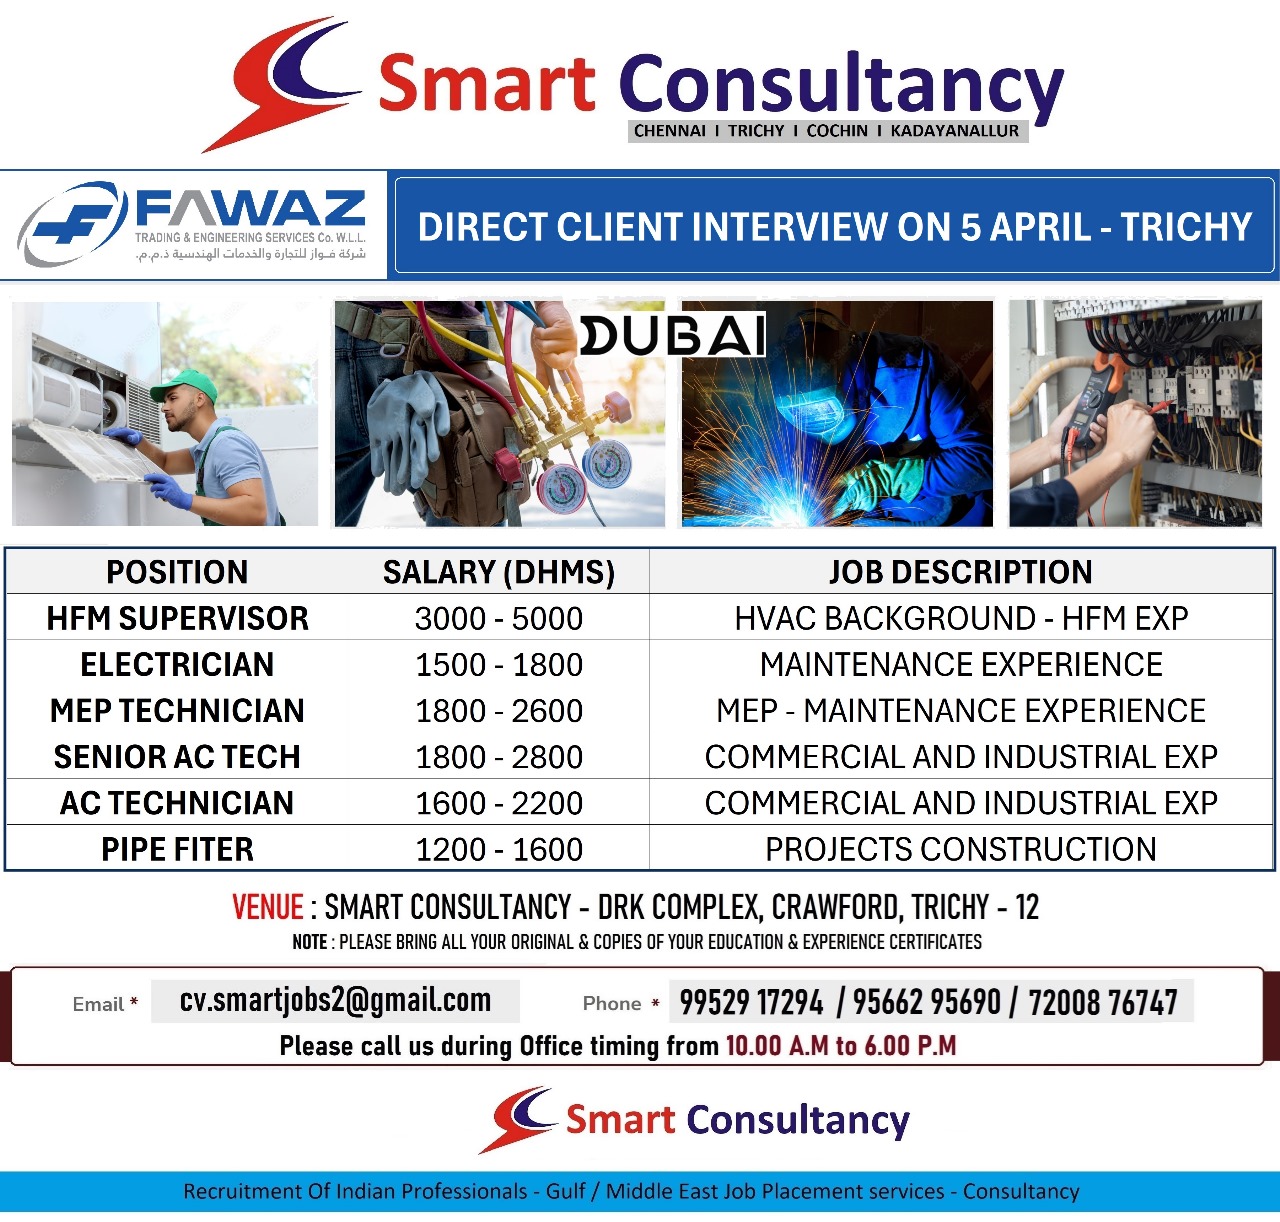 WANTED FOR A LEADING MAINTENANCE COMPANY – SAUDI / DIRECT CLIENT INTERVIEW ON 5th APRIL – TRICHY.